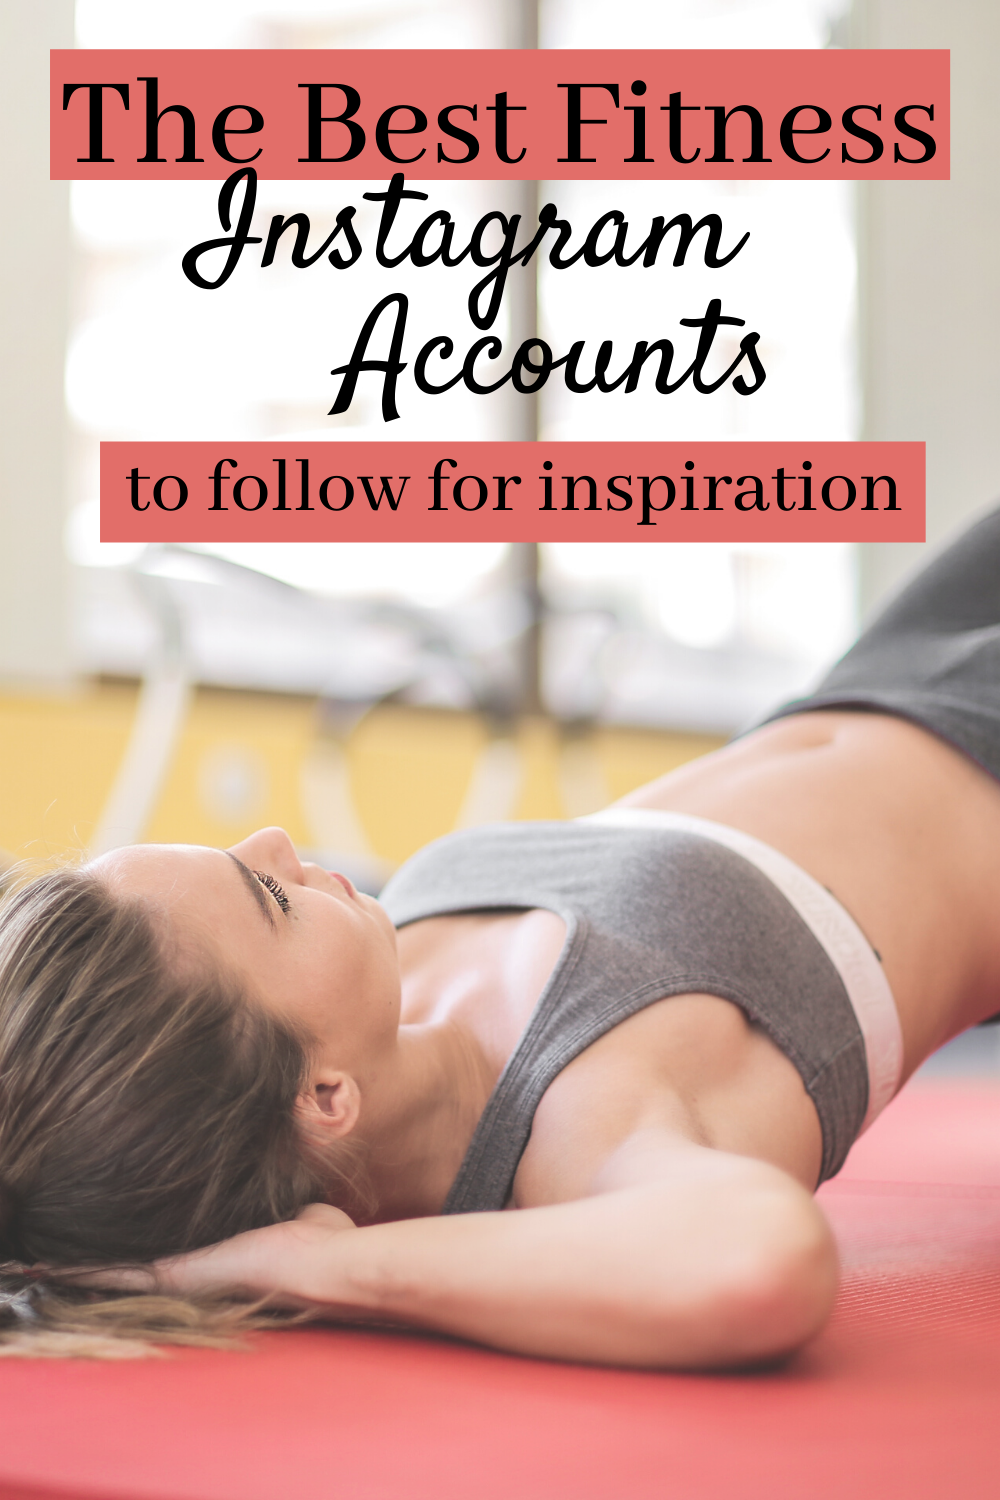 The Best Fitness Instagram Accounts to Follow for Inspiration -   how to start a fitness Instagram